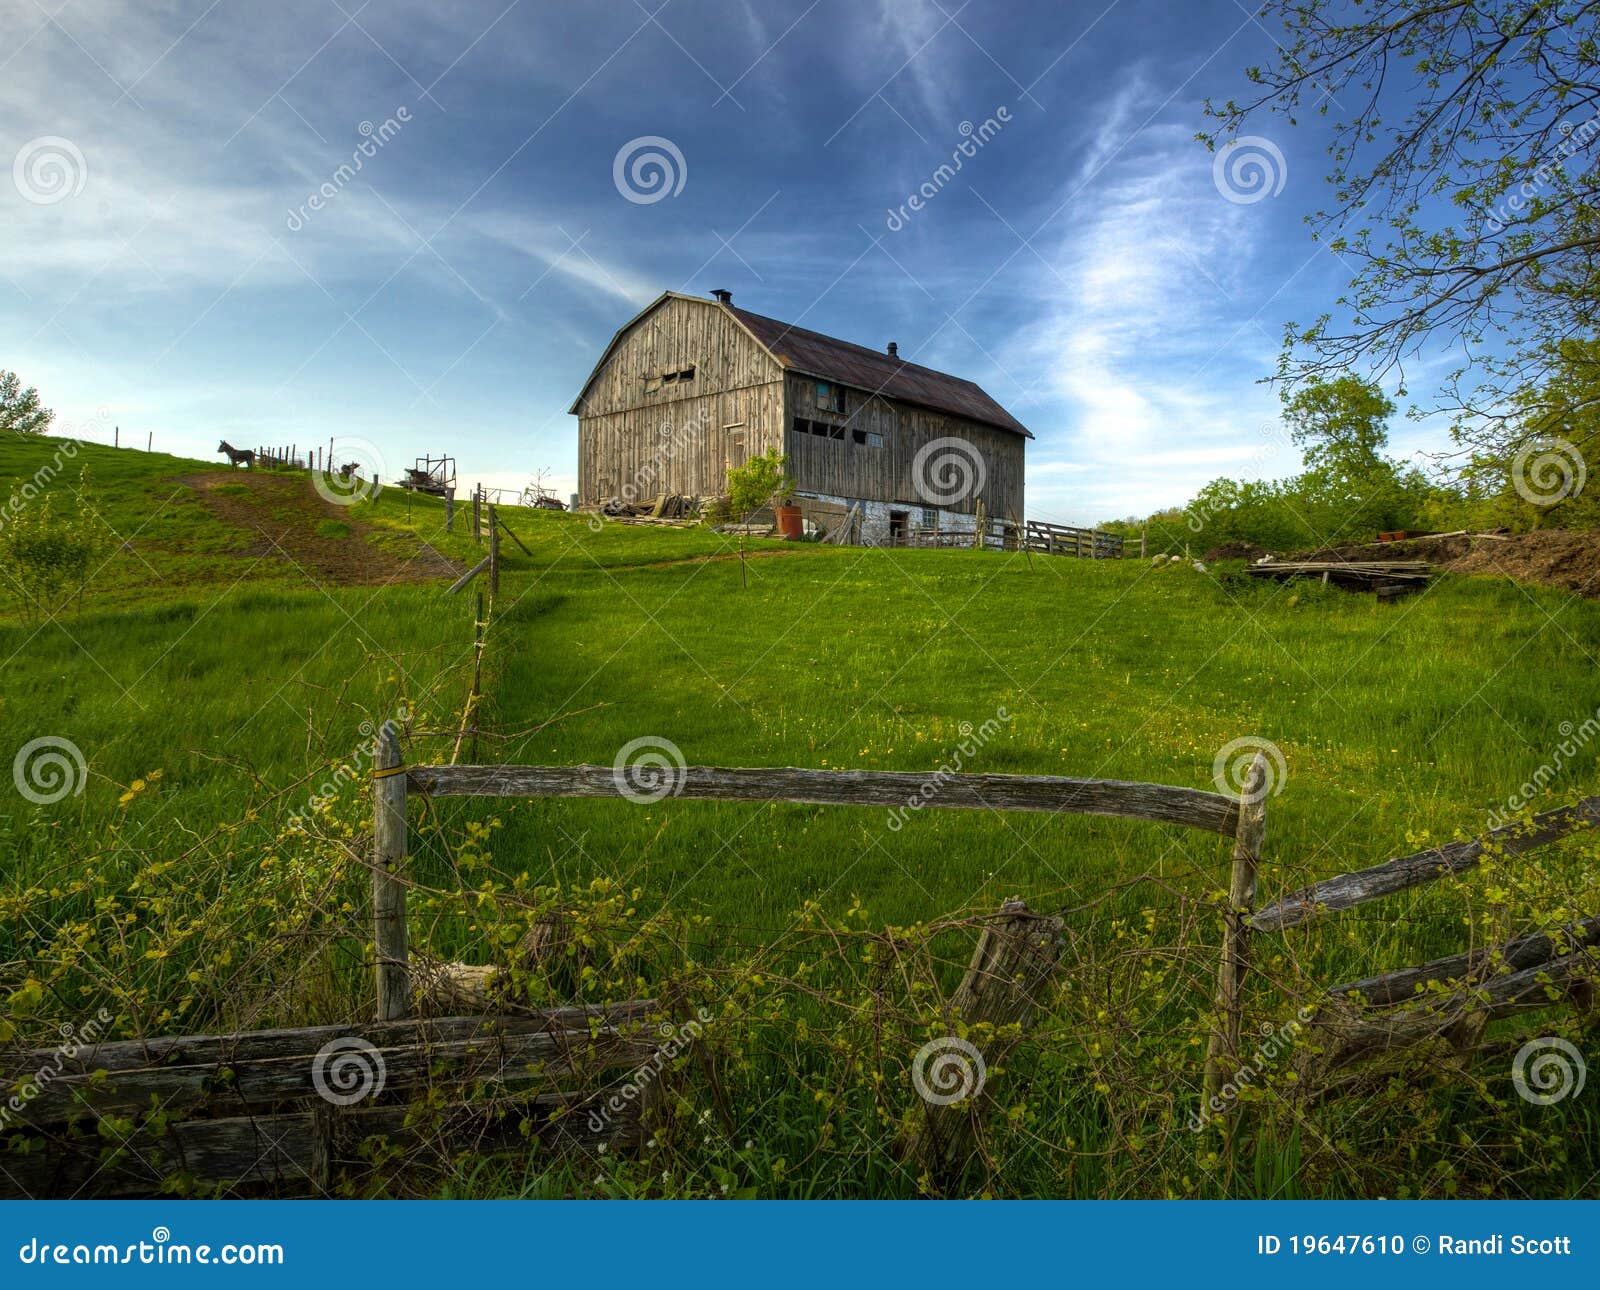 old barn on hill